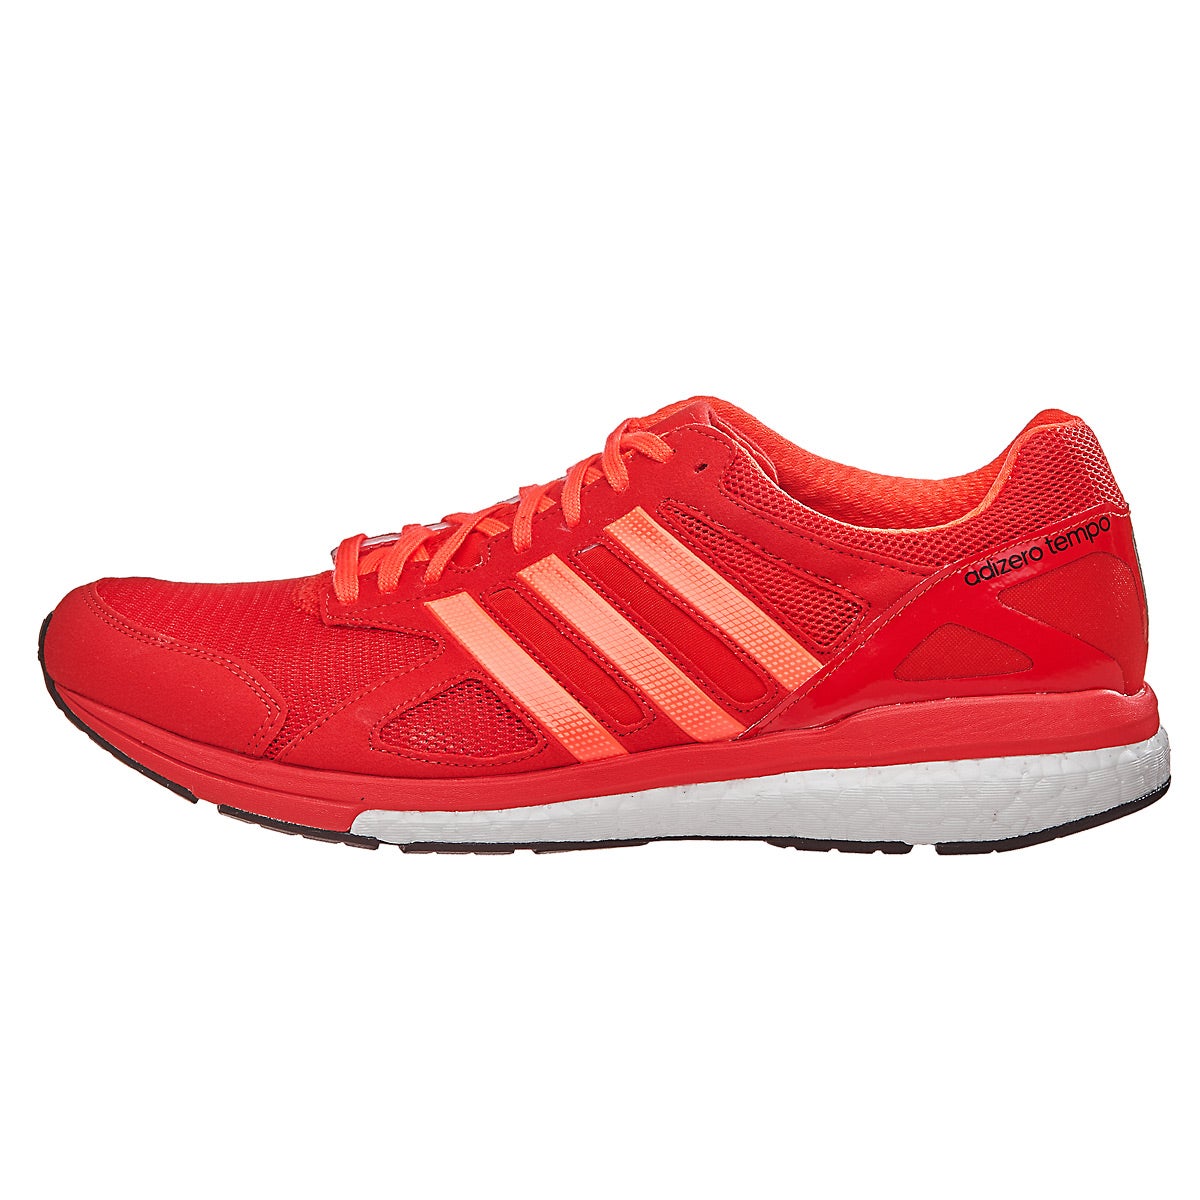 adidas adizero Tempo 8 Men's Shoes Red/Red/Black 360° View | Running ...